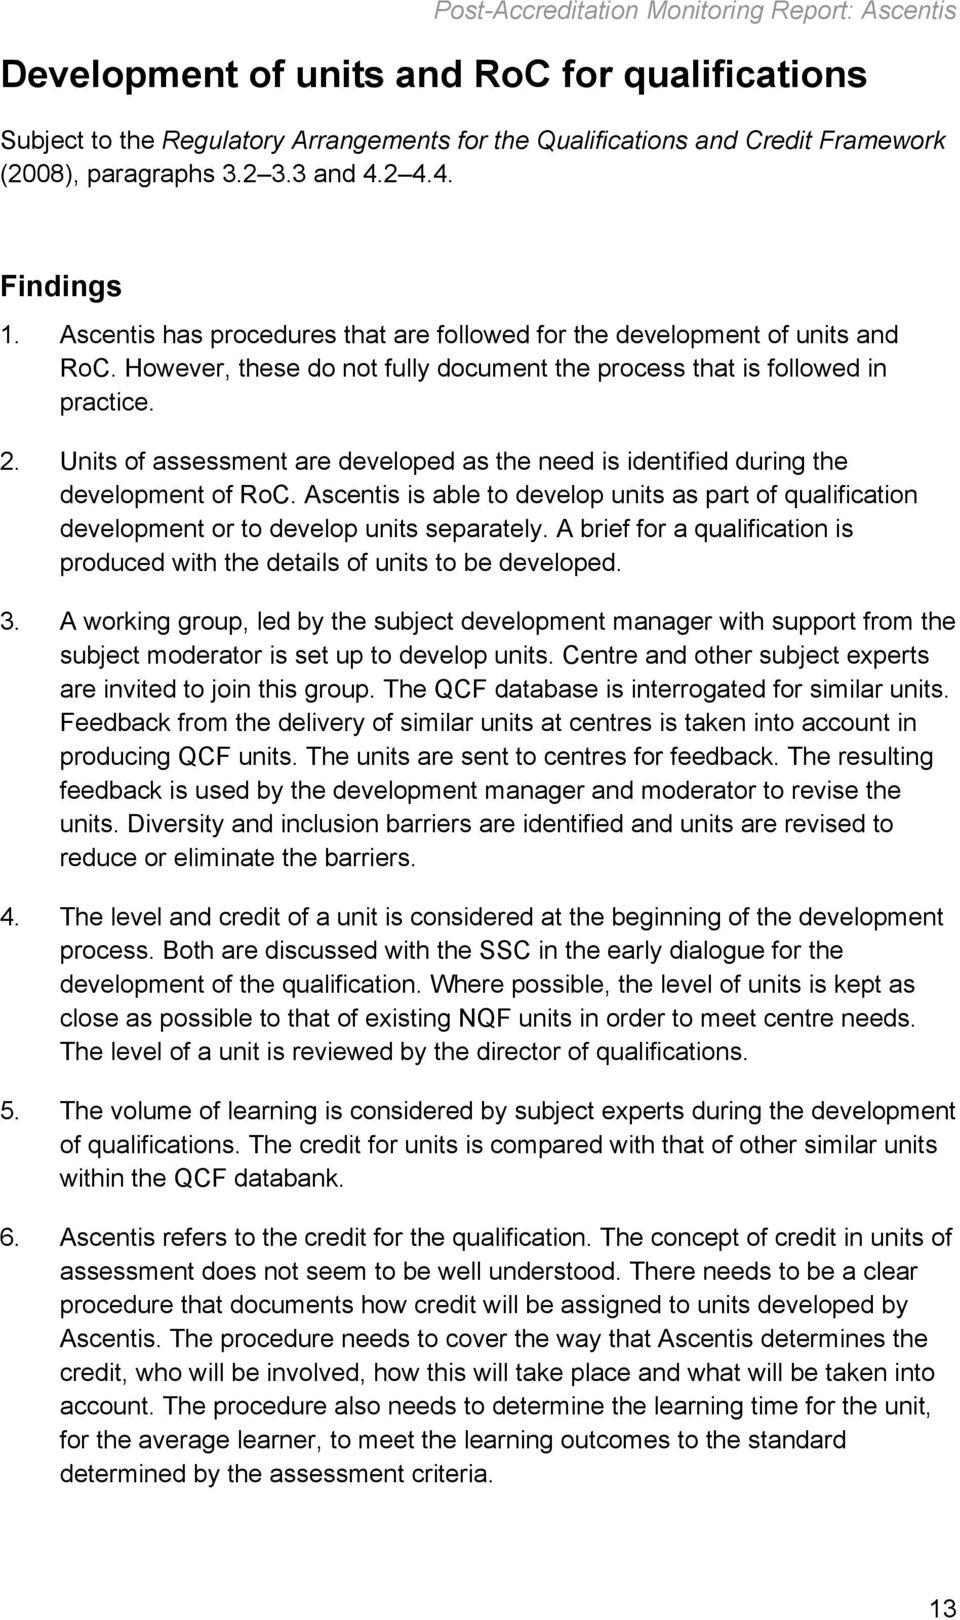 Units of assessment are developed as the need is identified during the development of RoC. Ascentis is able to develop units as part of qualification development or to develop units separately.